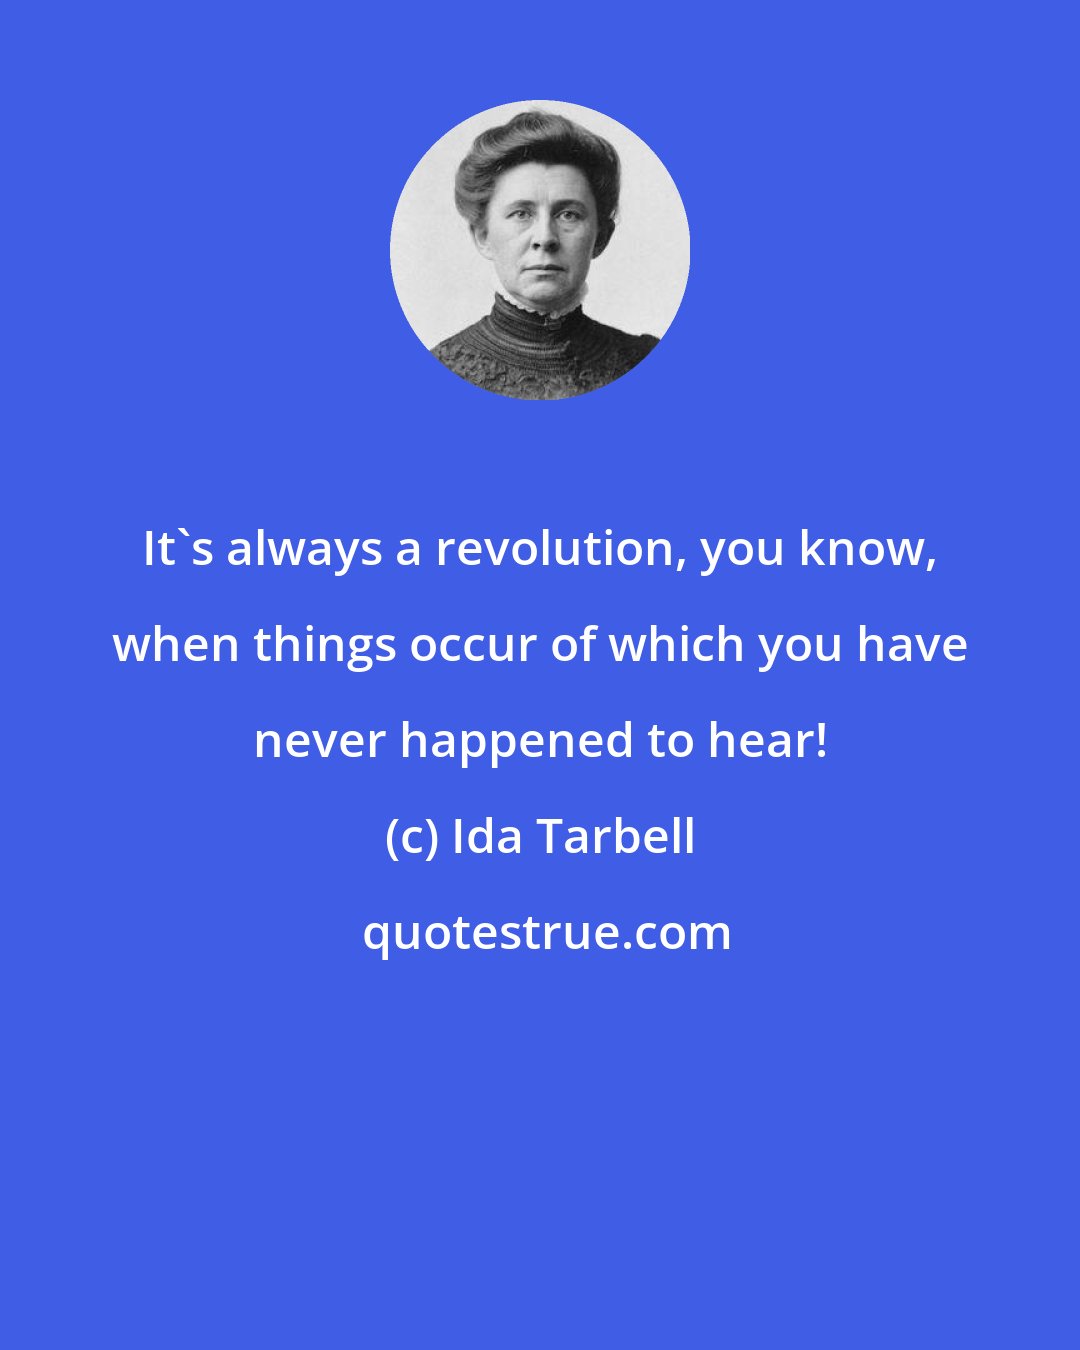 Ida Tarbell: It's always a revolution, you know, when things occur of which you have never happened to hear!